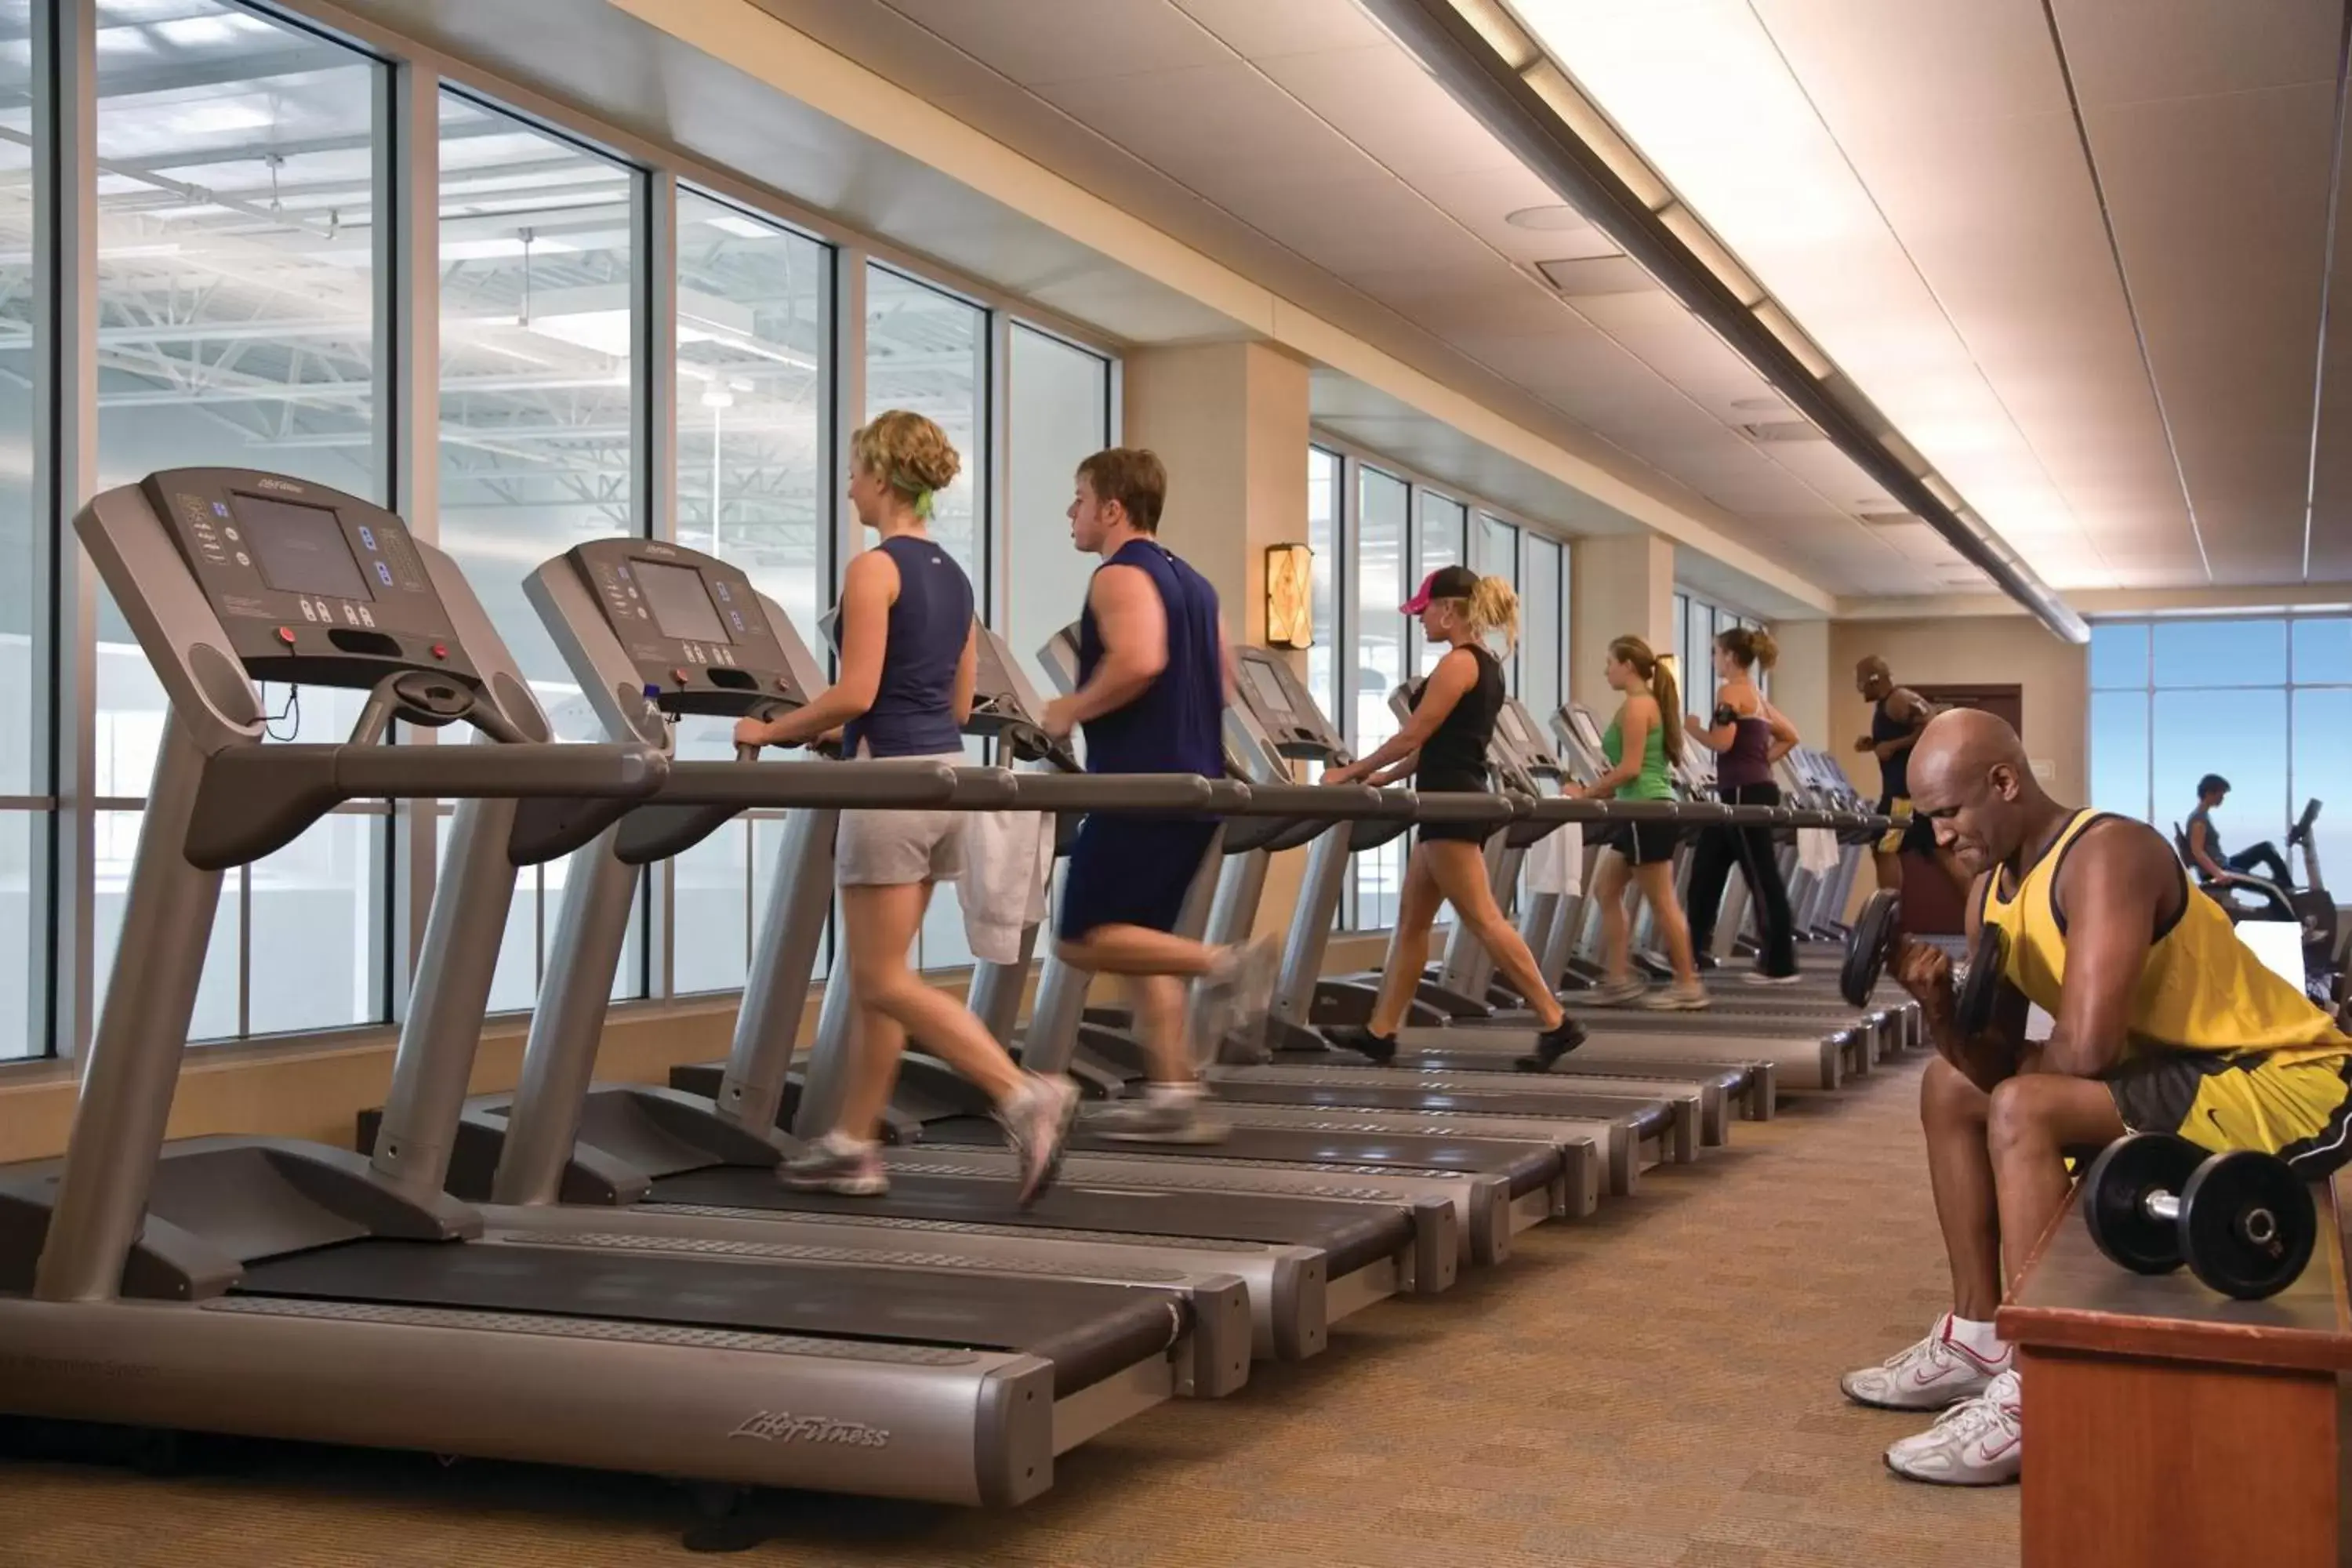 Fitness centre/facilities, Fitness Center/Facilities in Gaylord Opryland Resort & Convention Center